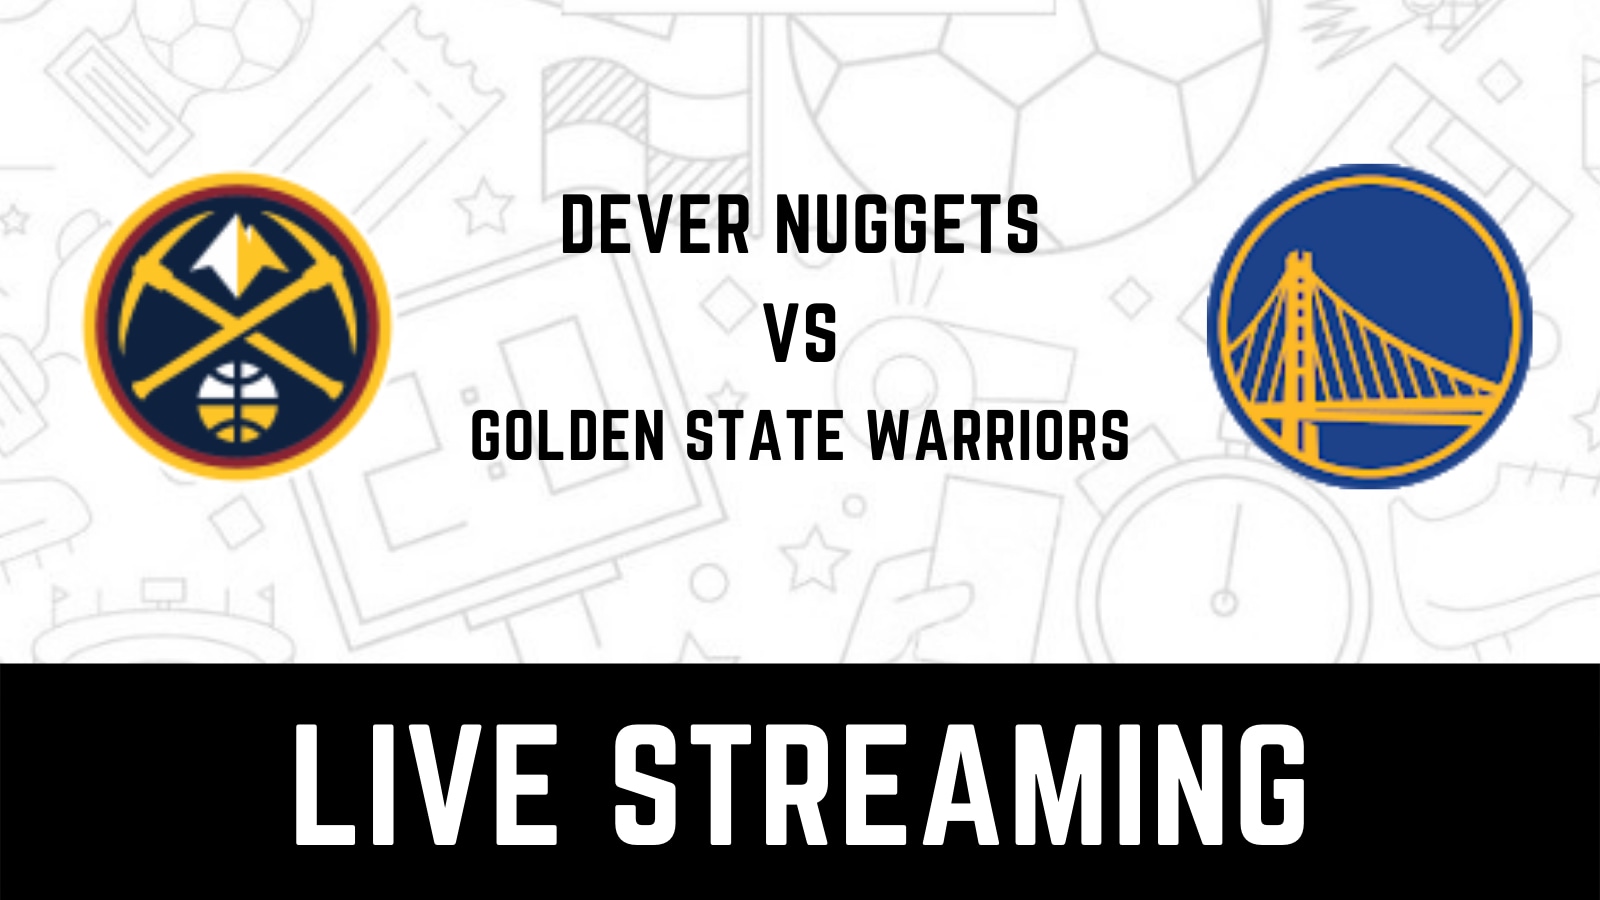 Denver Nuggets vs Golden State Warriors Live Streaming When and Where to Watch NBA 2022 Playoffs Live Coverage on Live TV Online